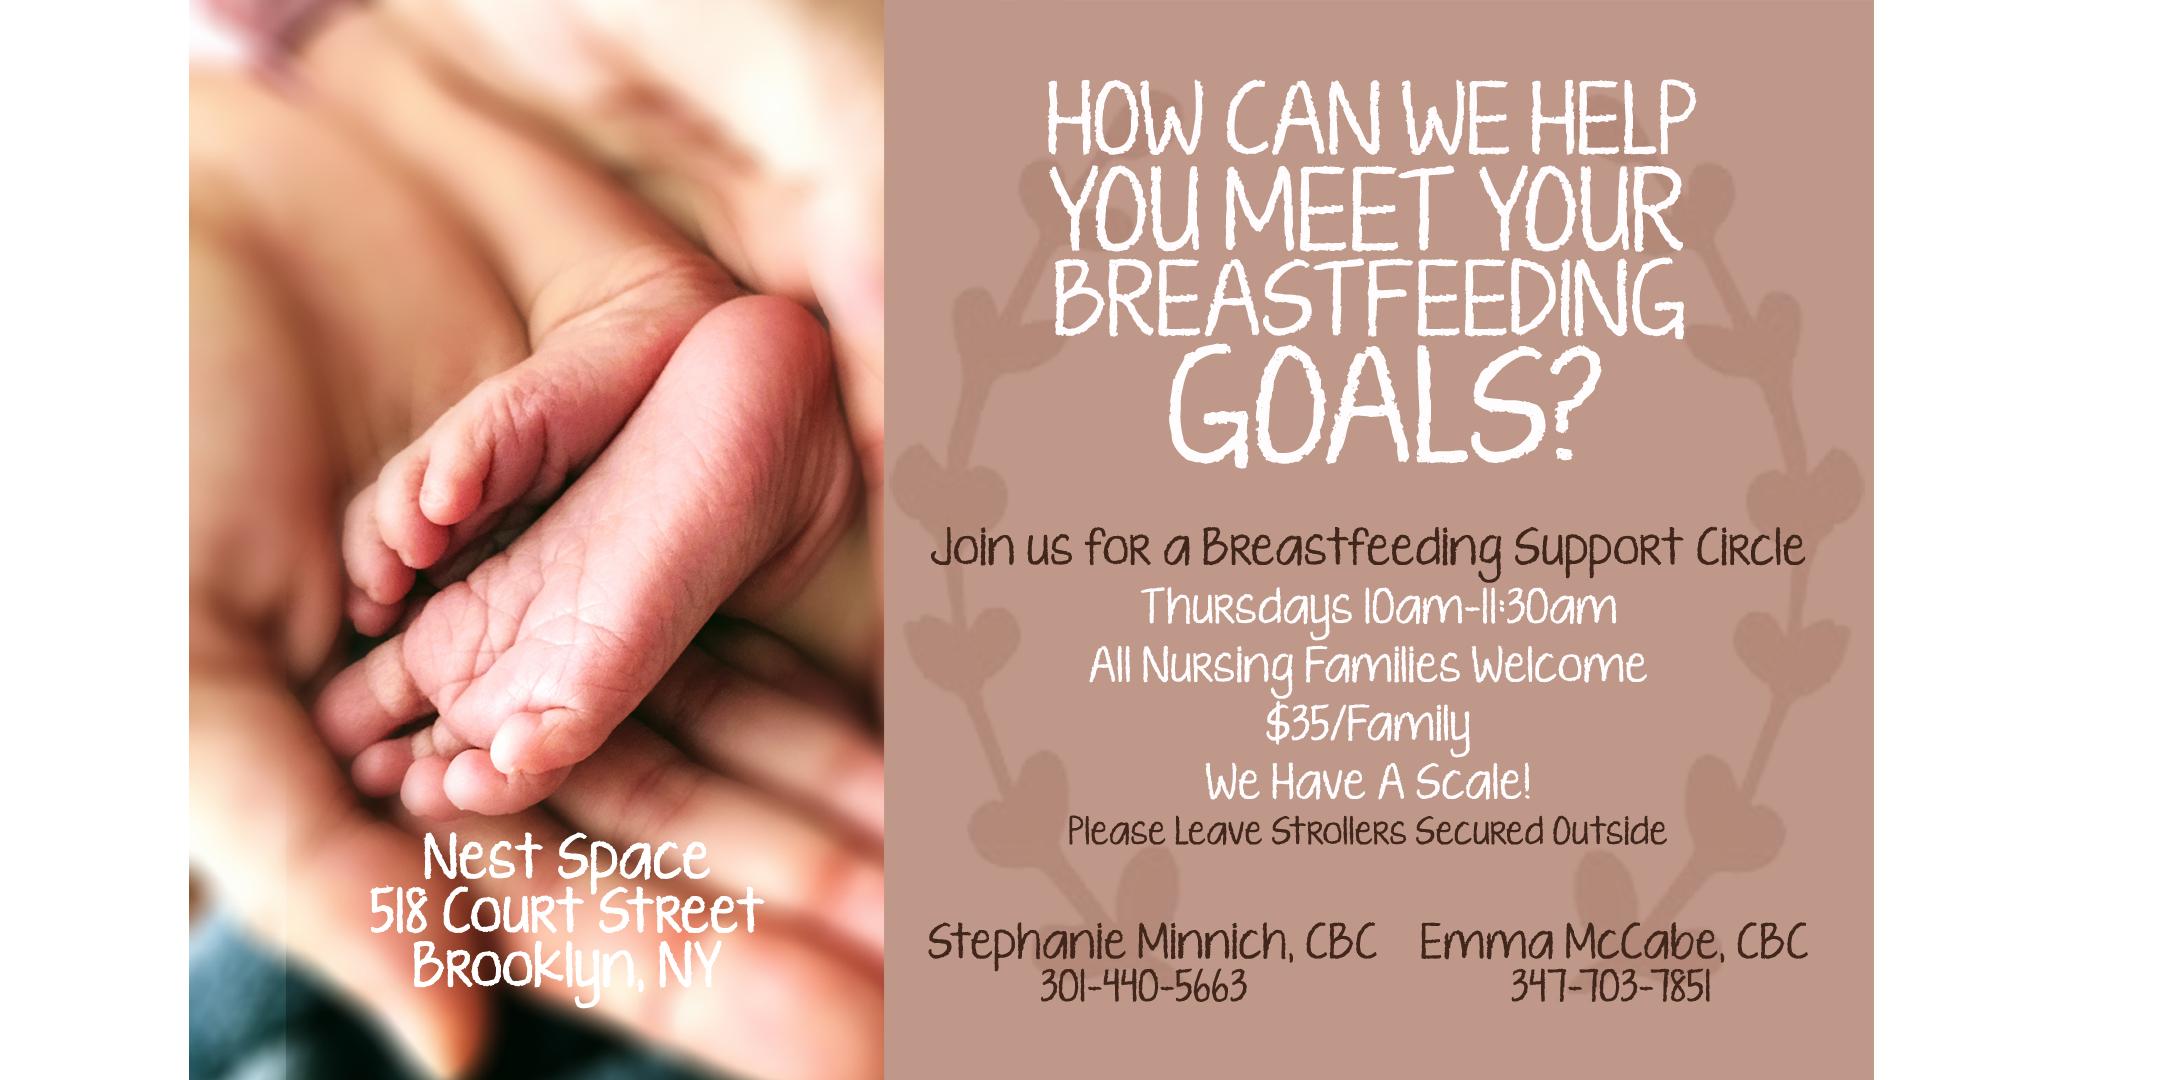 Nest Space Breastfeeding Support Group